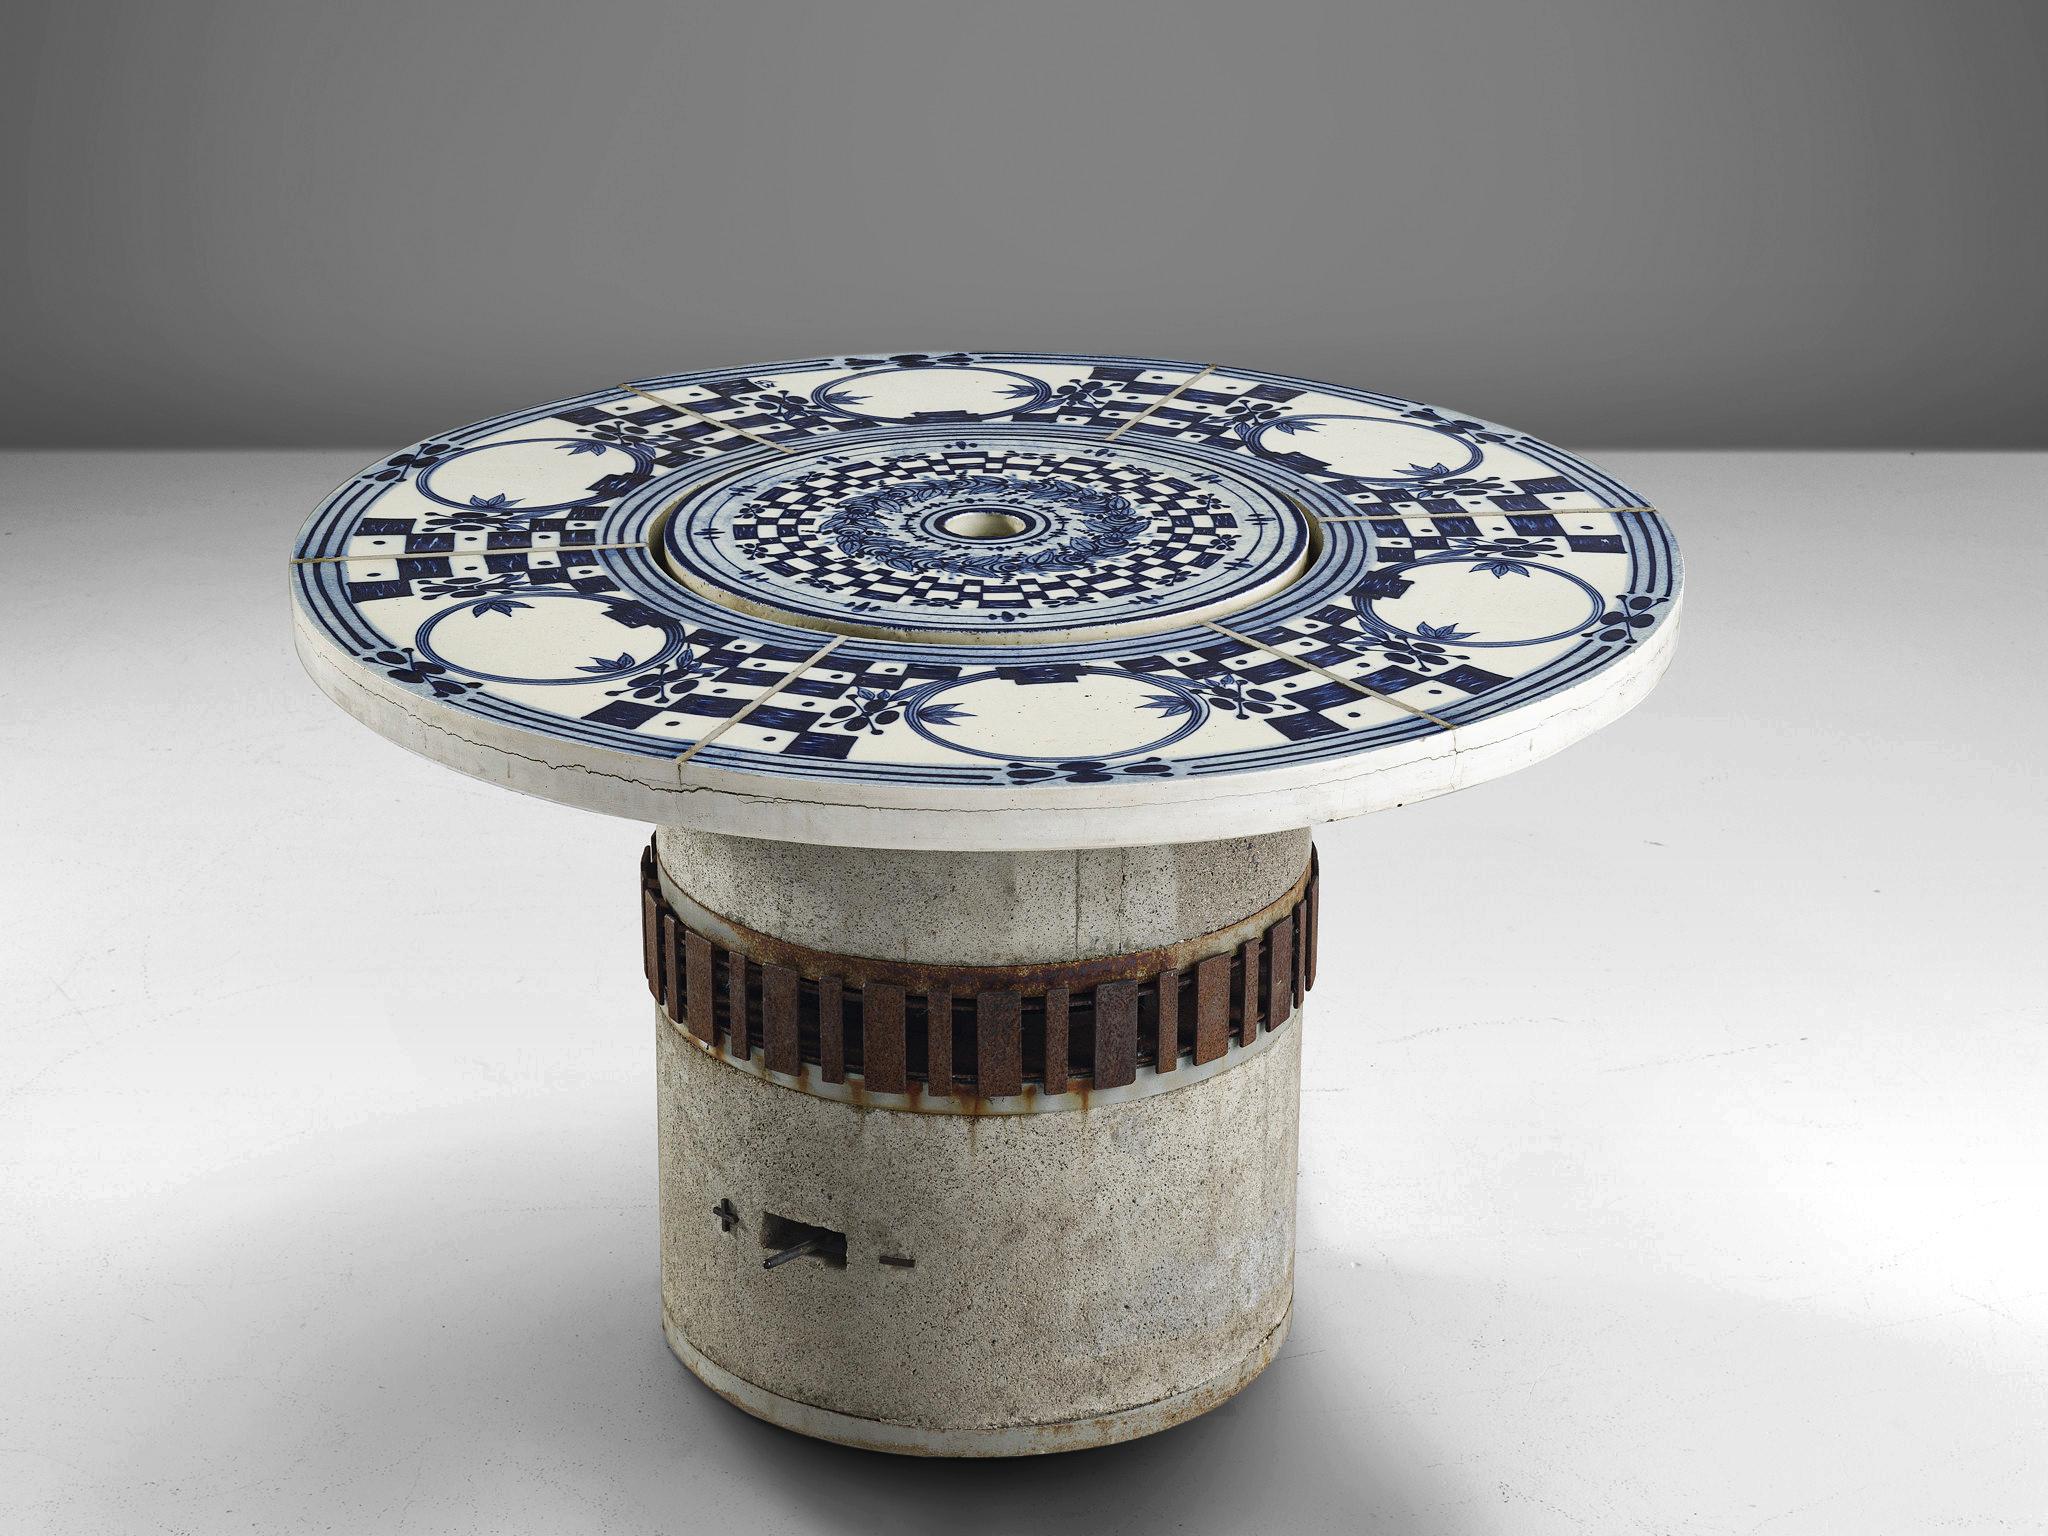 Bjørn Wiinblad, 'Hibachi' grill table, faience tiles and glazed concrete, metal, Denmark / Germany, 1970s

This garden table is decorated with hand painted ceramic tiles in blue and white color. The top features a removable centre beneath which is